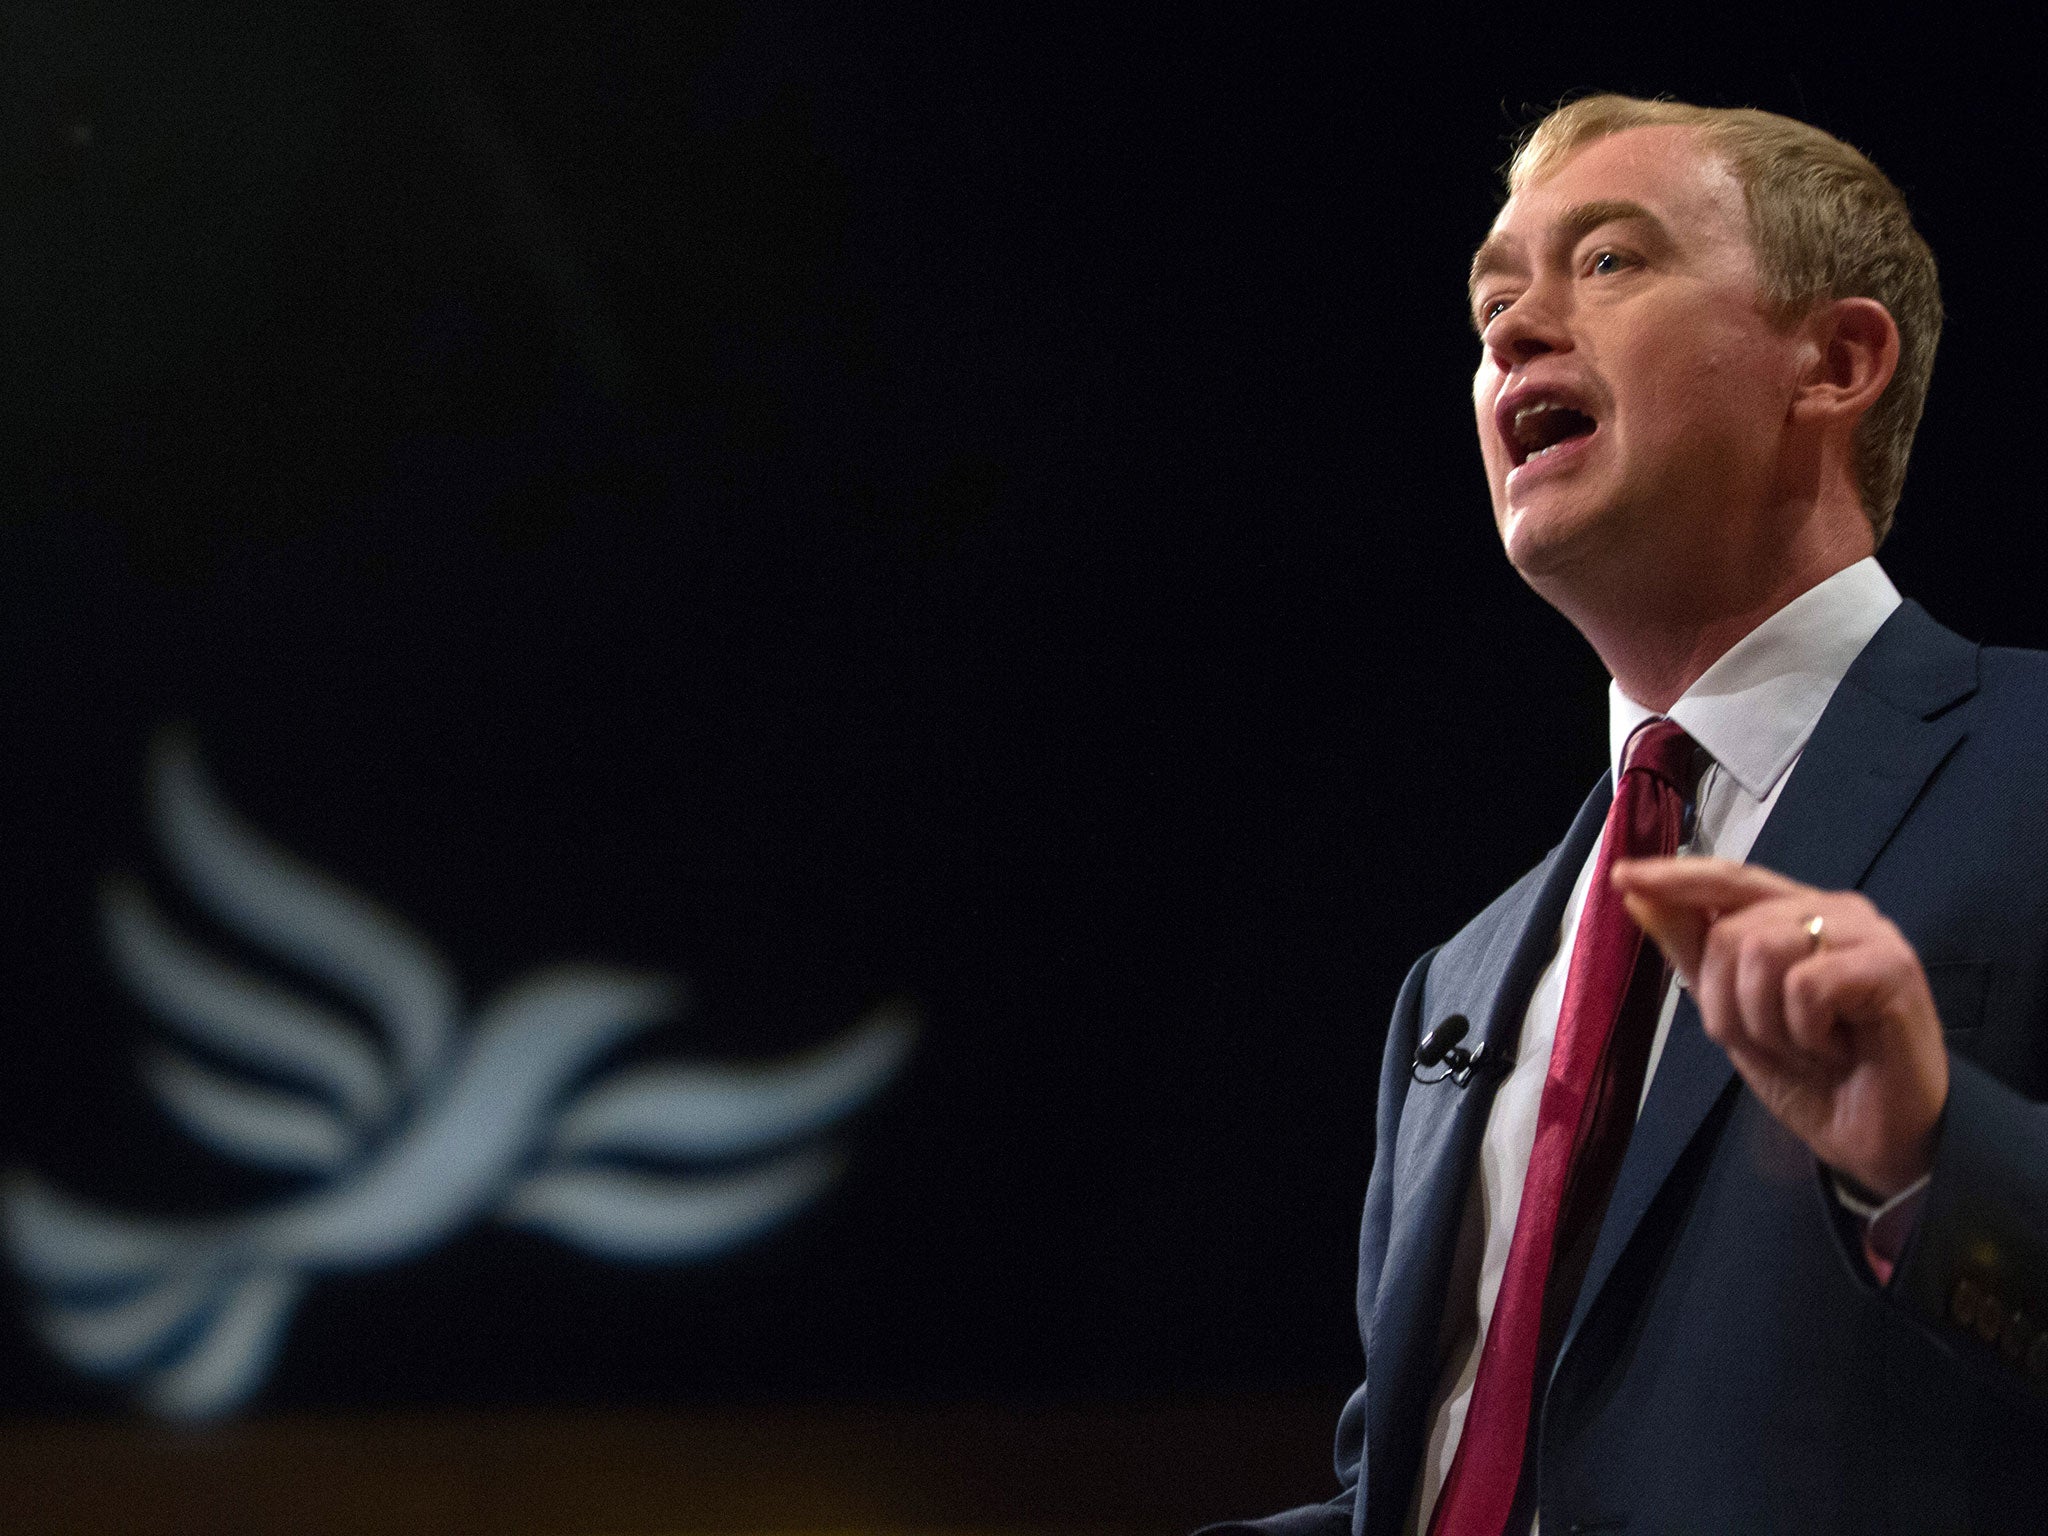 Liberal Democrat leader Tim Farron said that the Government proposals amounted to little more than a 'tax on love' and called for the changes to be scrapped